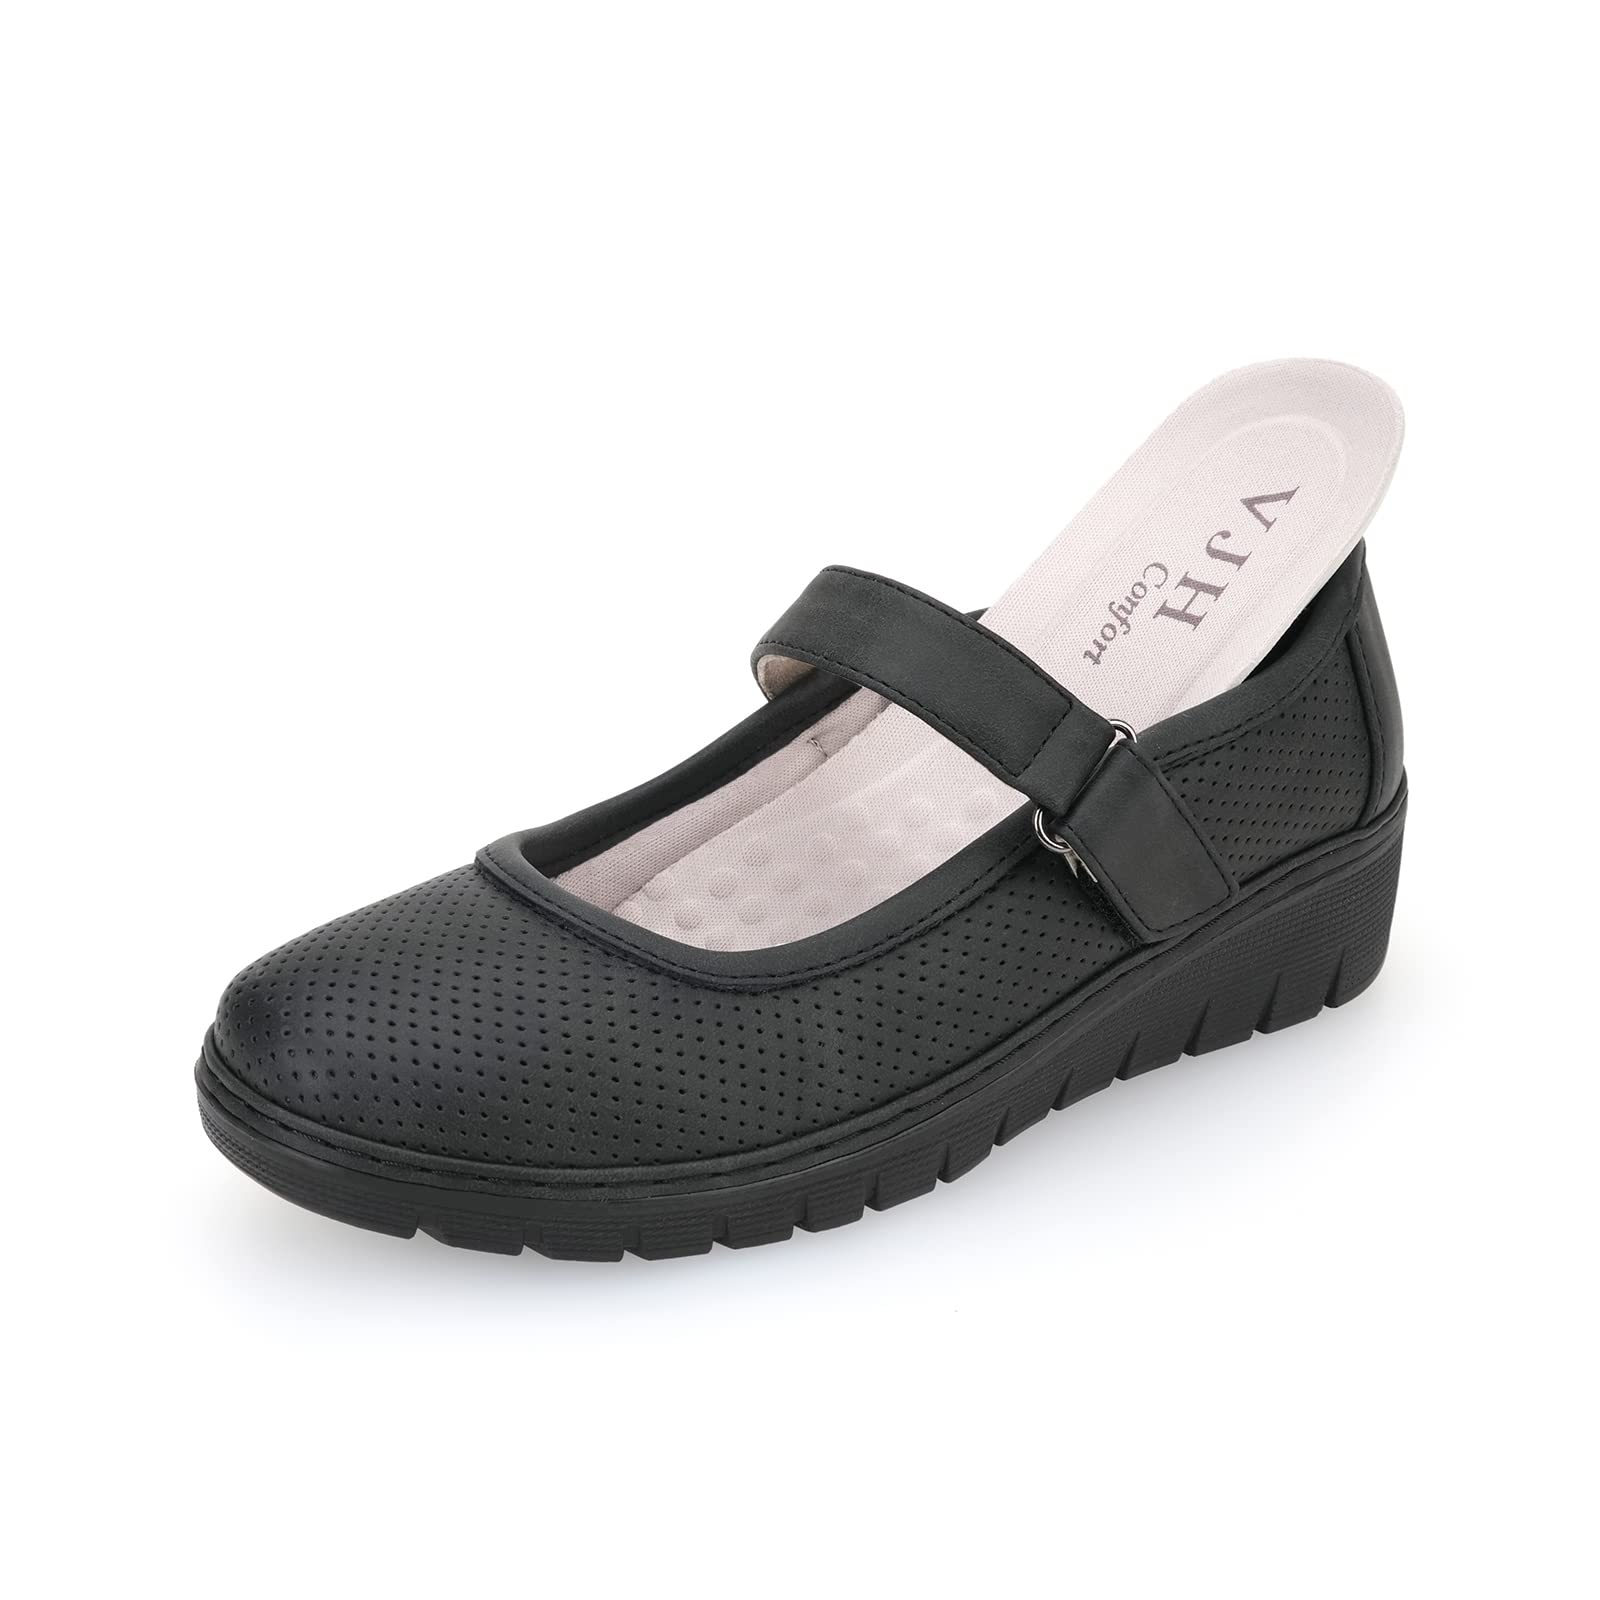  VJH confort Women's Mary Jane Flats, Breathable Slip-On Light  Weight Comfort Orthotic Casual Walking Shoes (Black,5)